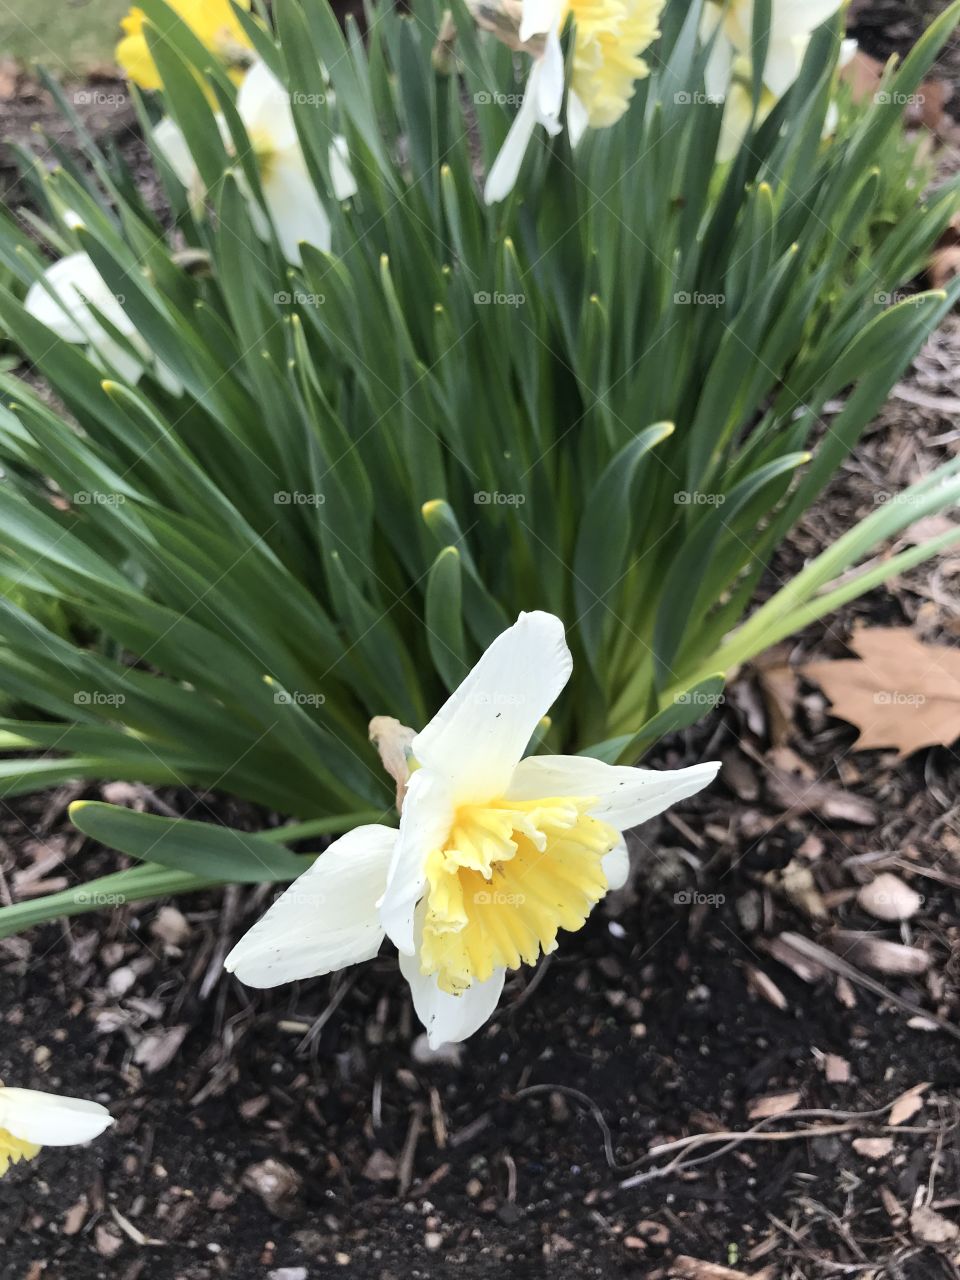 First of the daffodils 